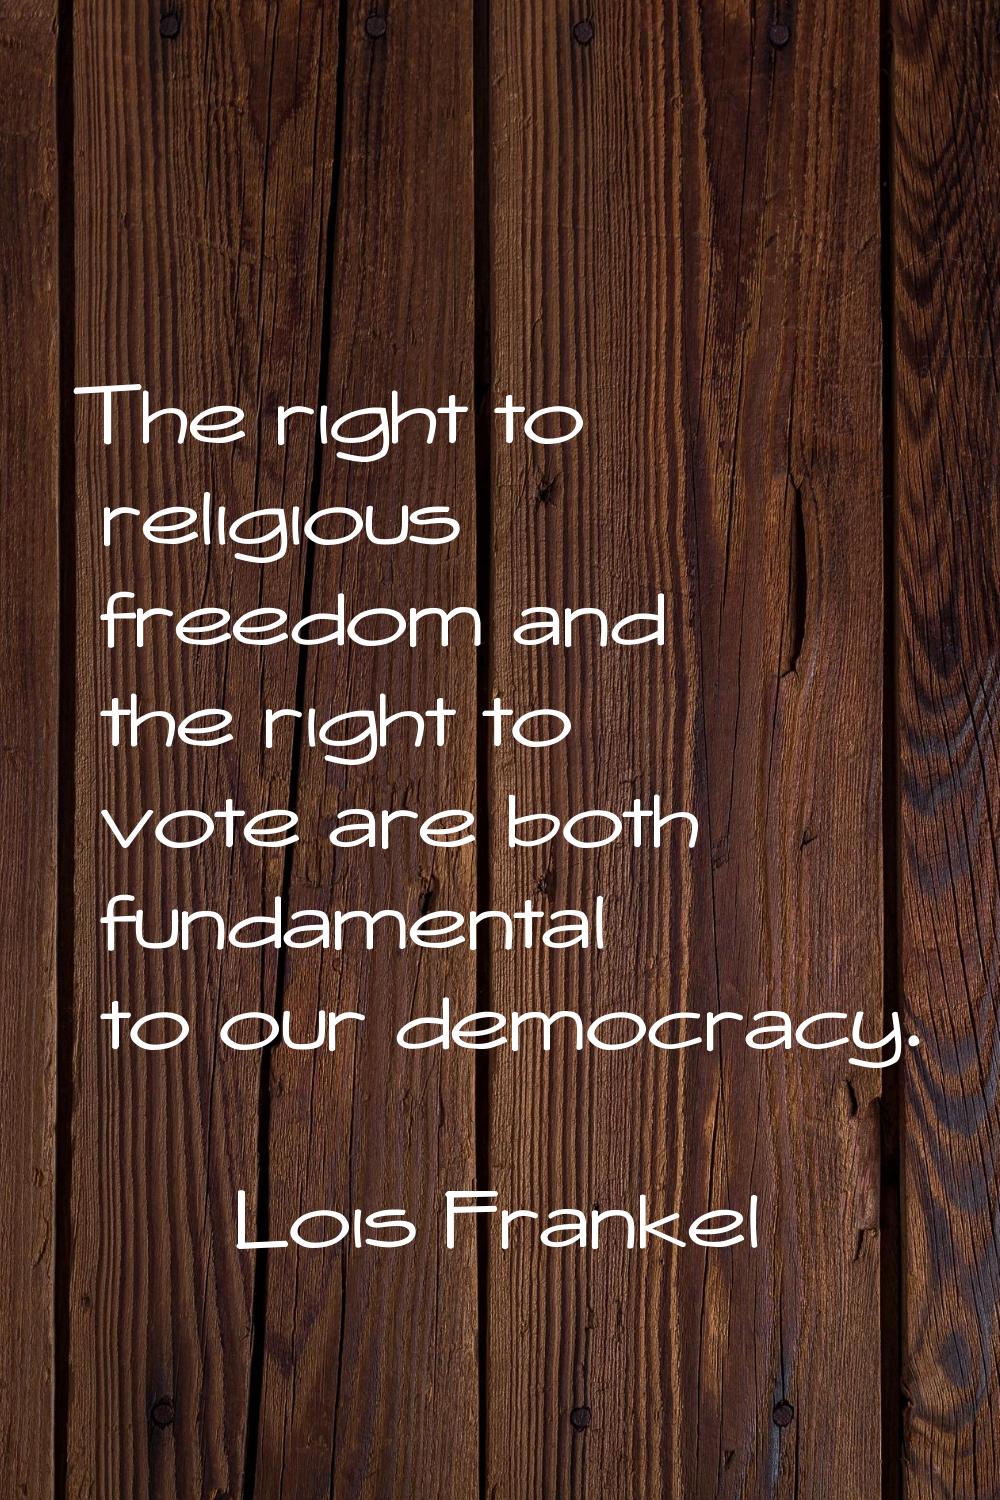 The right to religious freedom and the right to vote are both fundamental to our democracy.